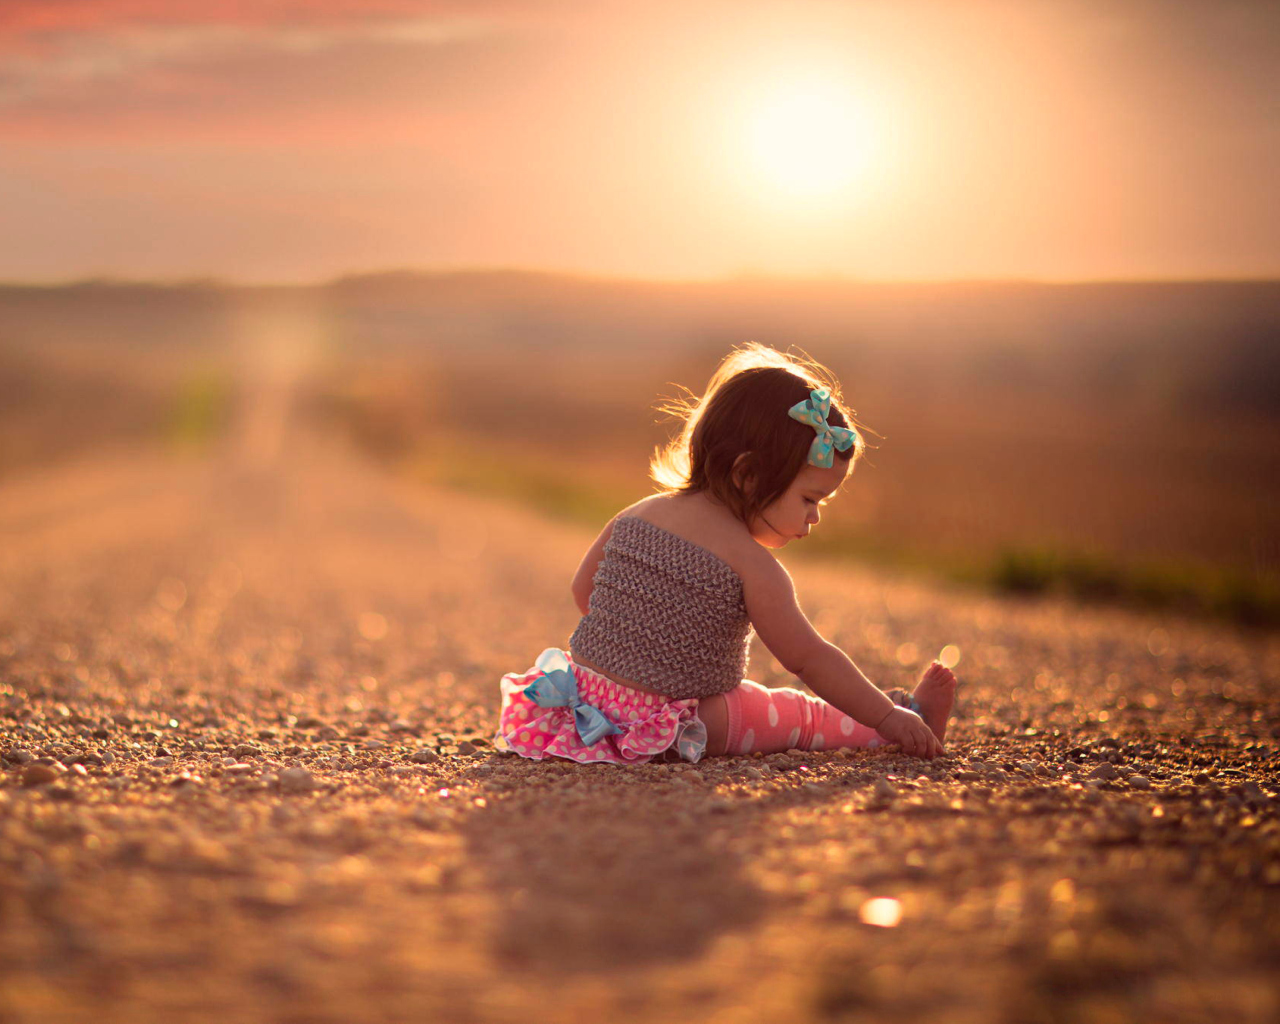 Das Child On Road At Sunset Wallpaper 1280x1024